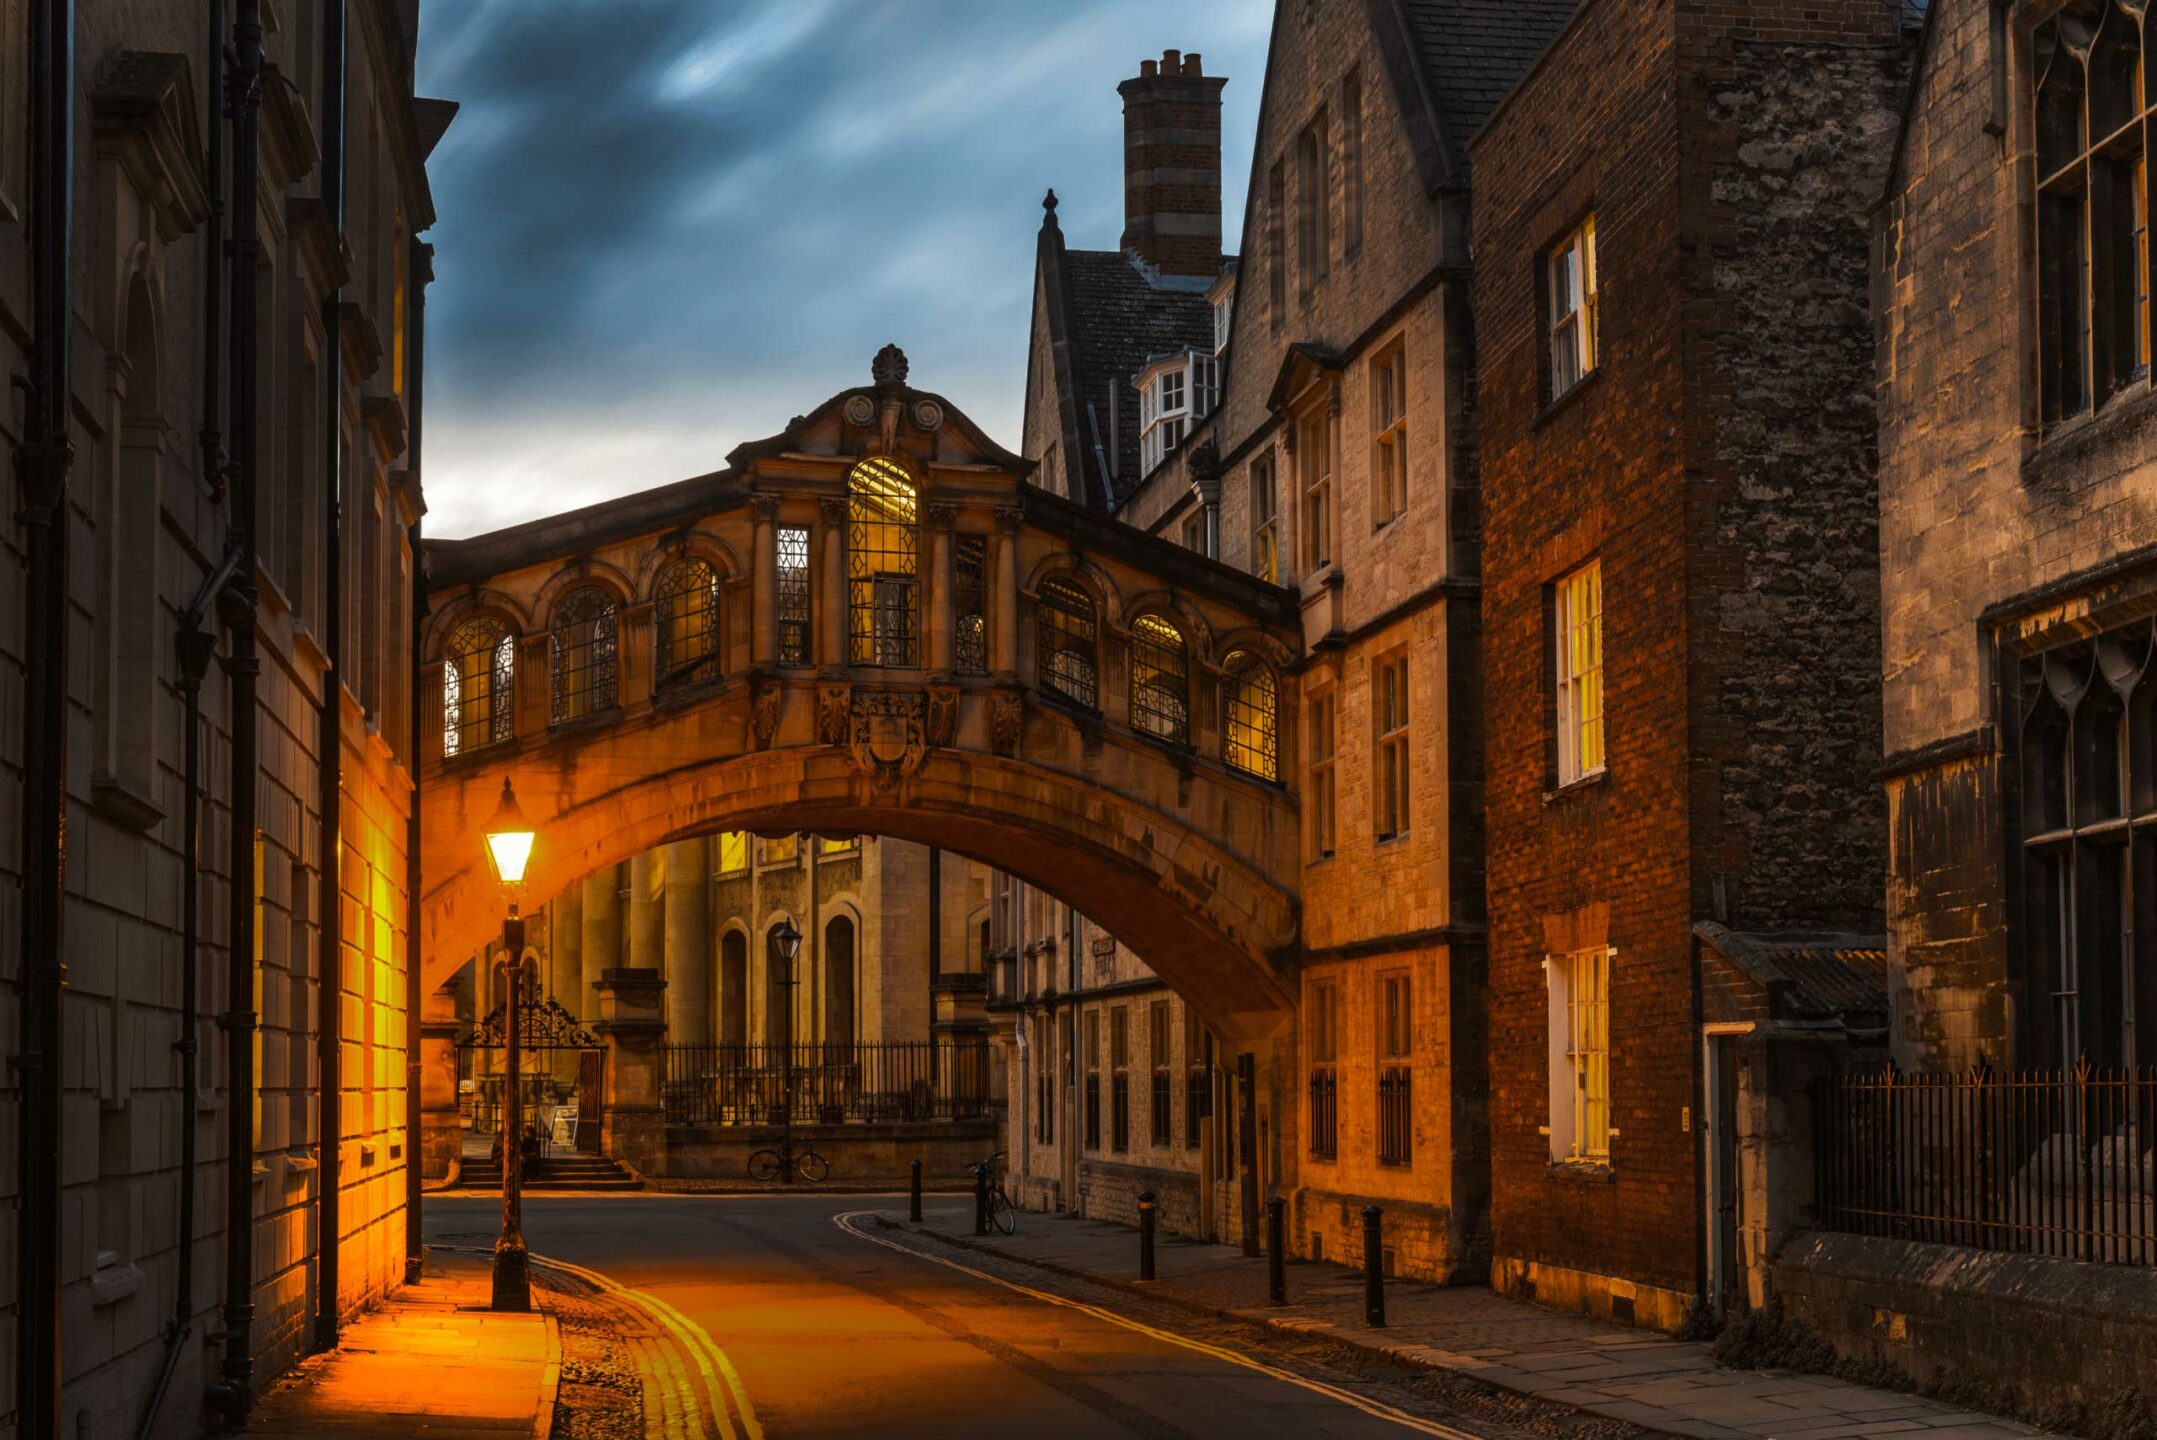 The bridge of Sighs in Oxford in the late evening